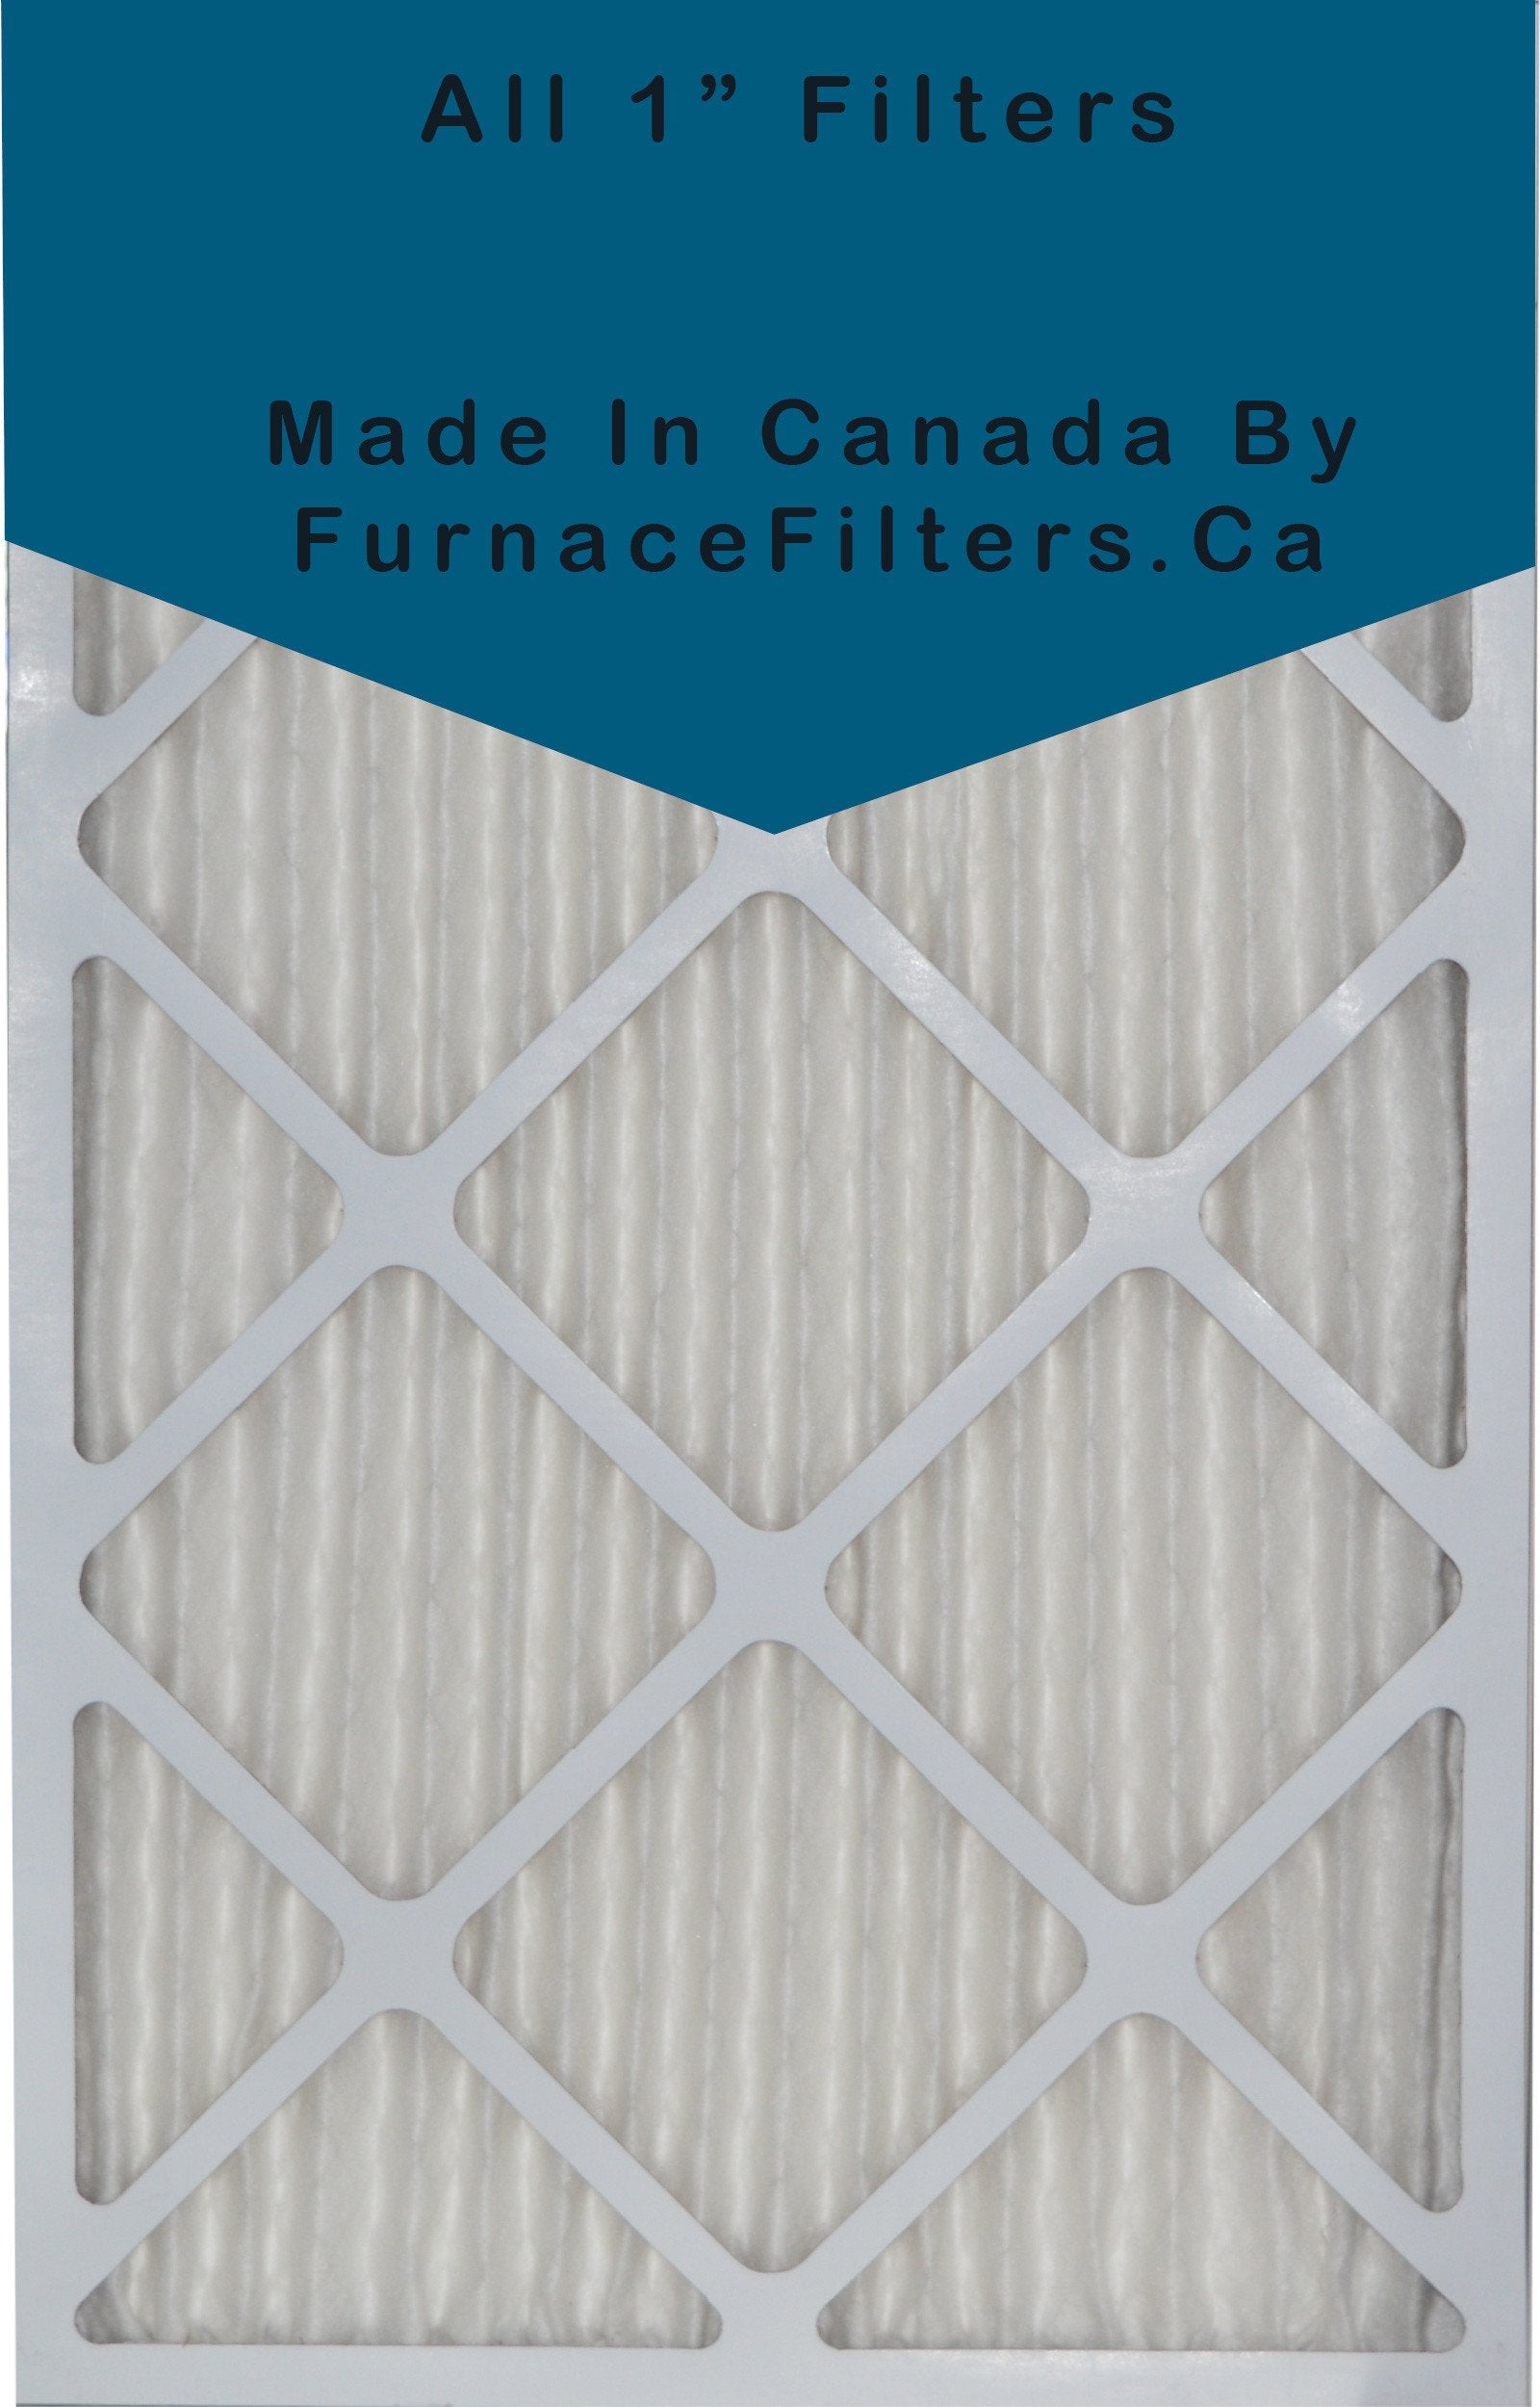 20x30x1 Furnace Filter MERV 8 Pleated Filters. Case of 12